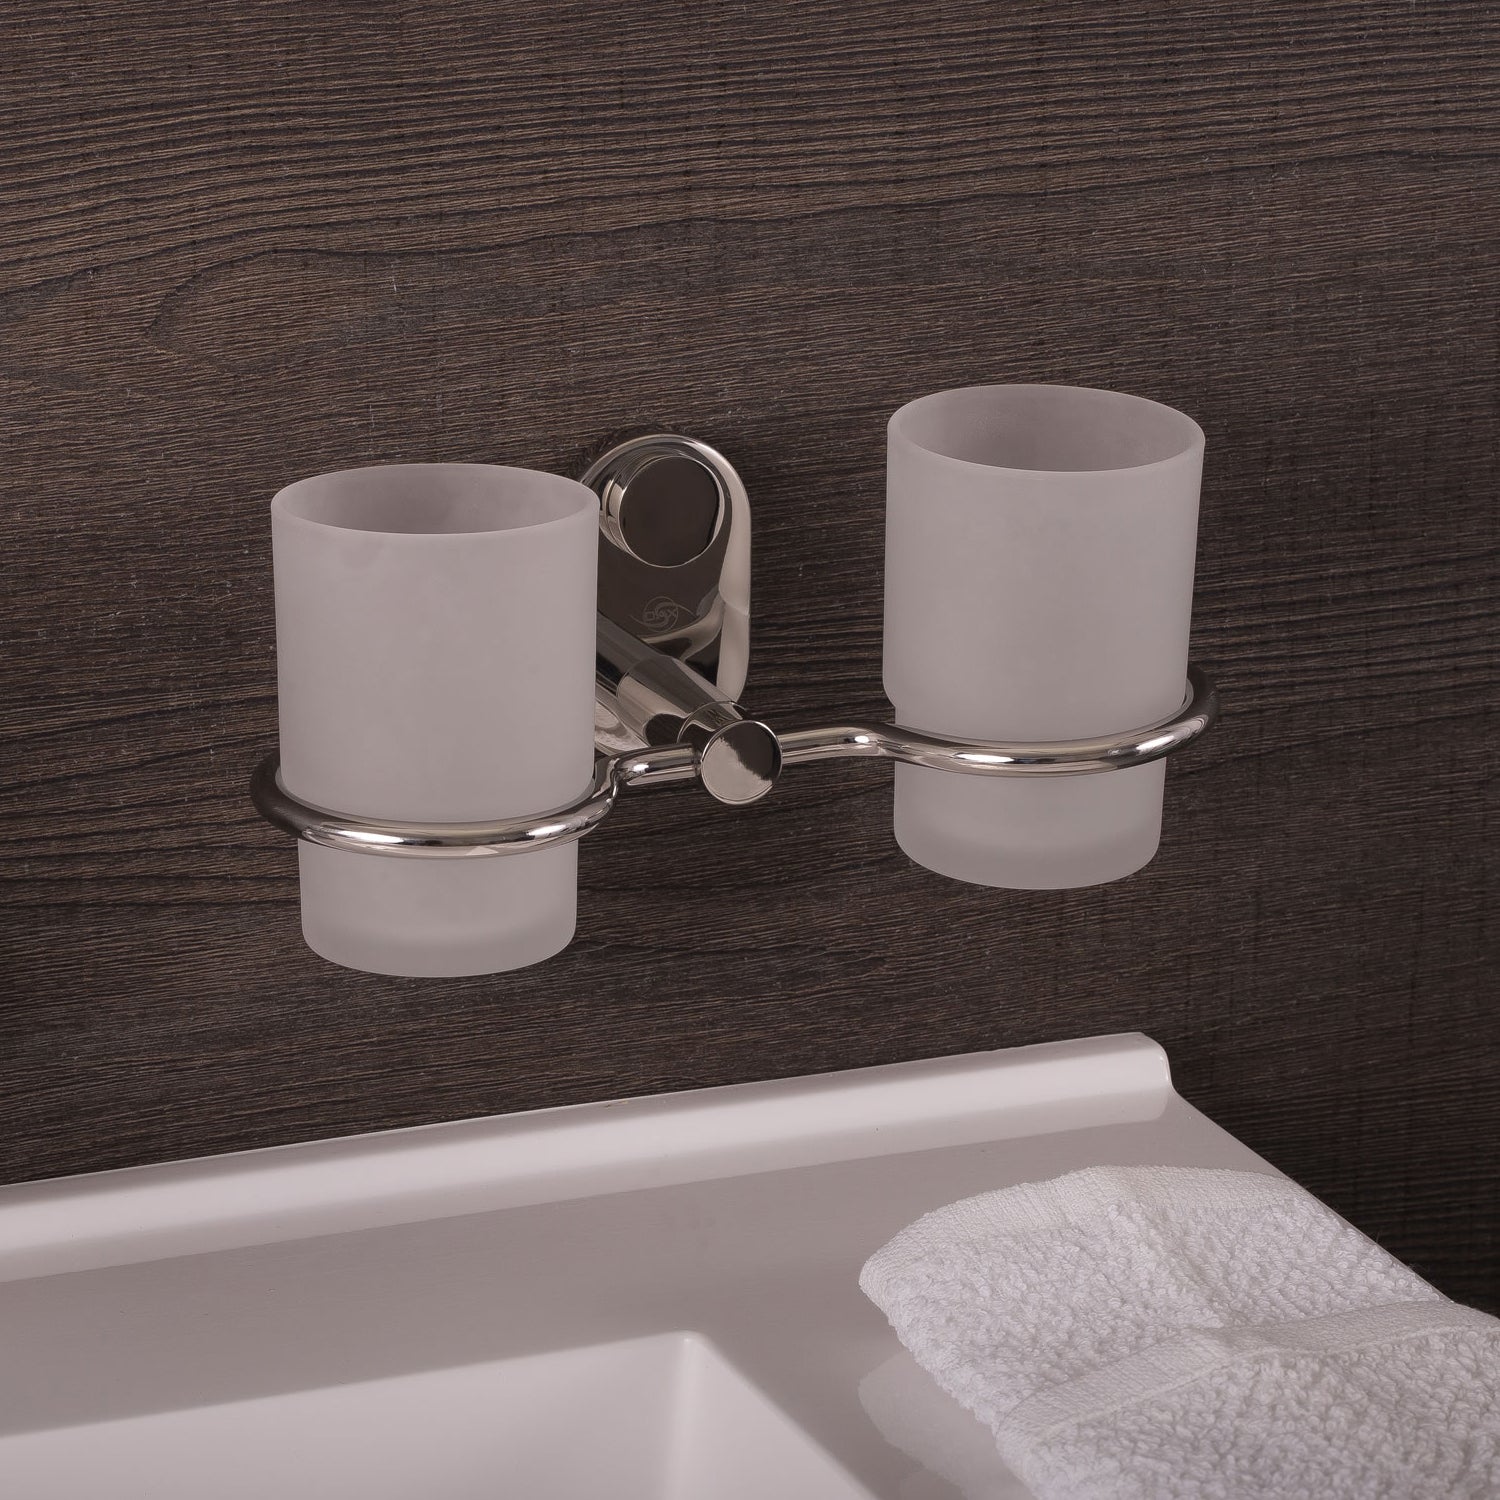 DAX Bathroom Double Tumbler Toothbrush Holder, Wall Mount Stainless St